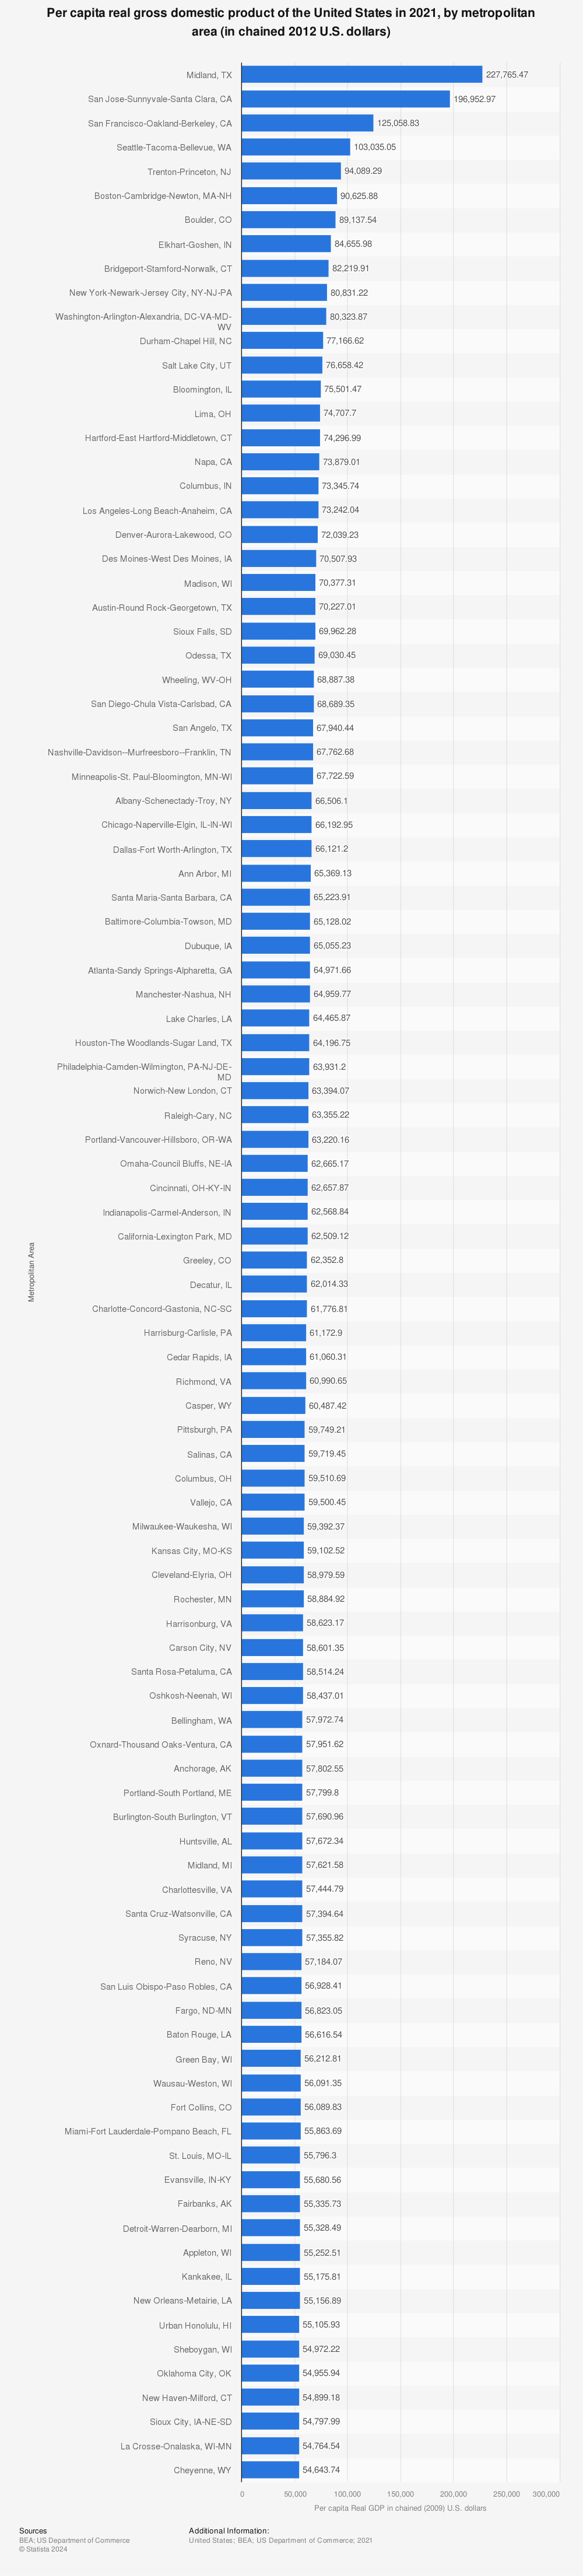 Statistic: Per capita Real Gross Domestic Product (GDP) of the United States in 2019, by metropolitan area (in chained 2012 U.S. dollars) | Statista